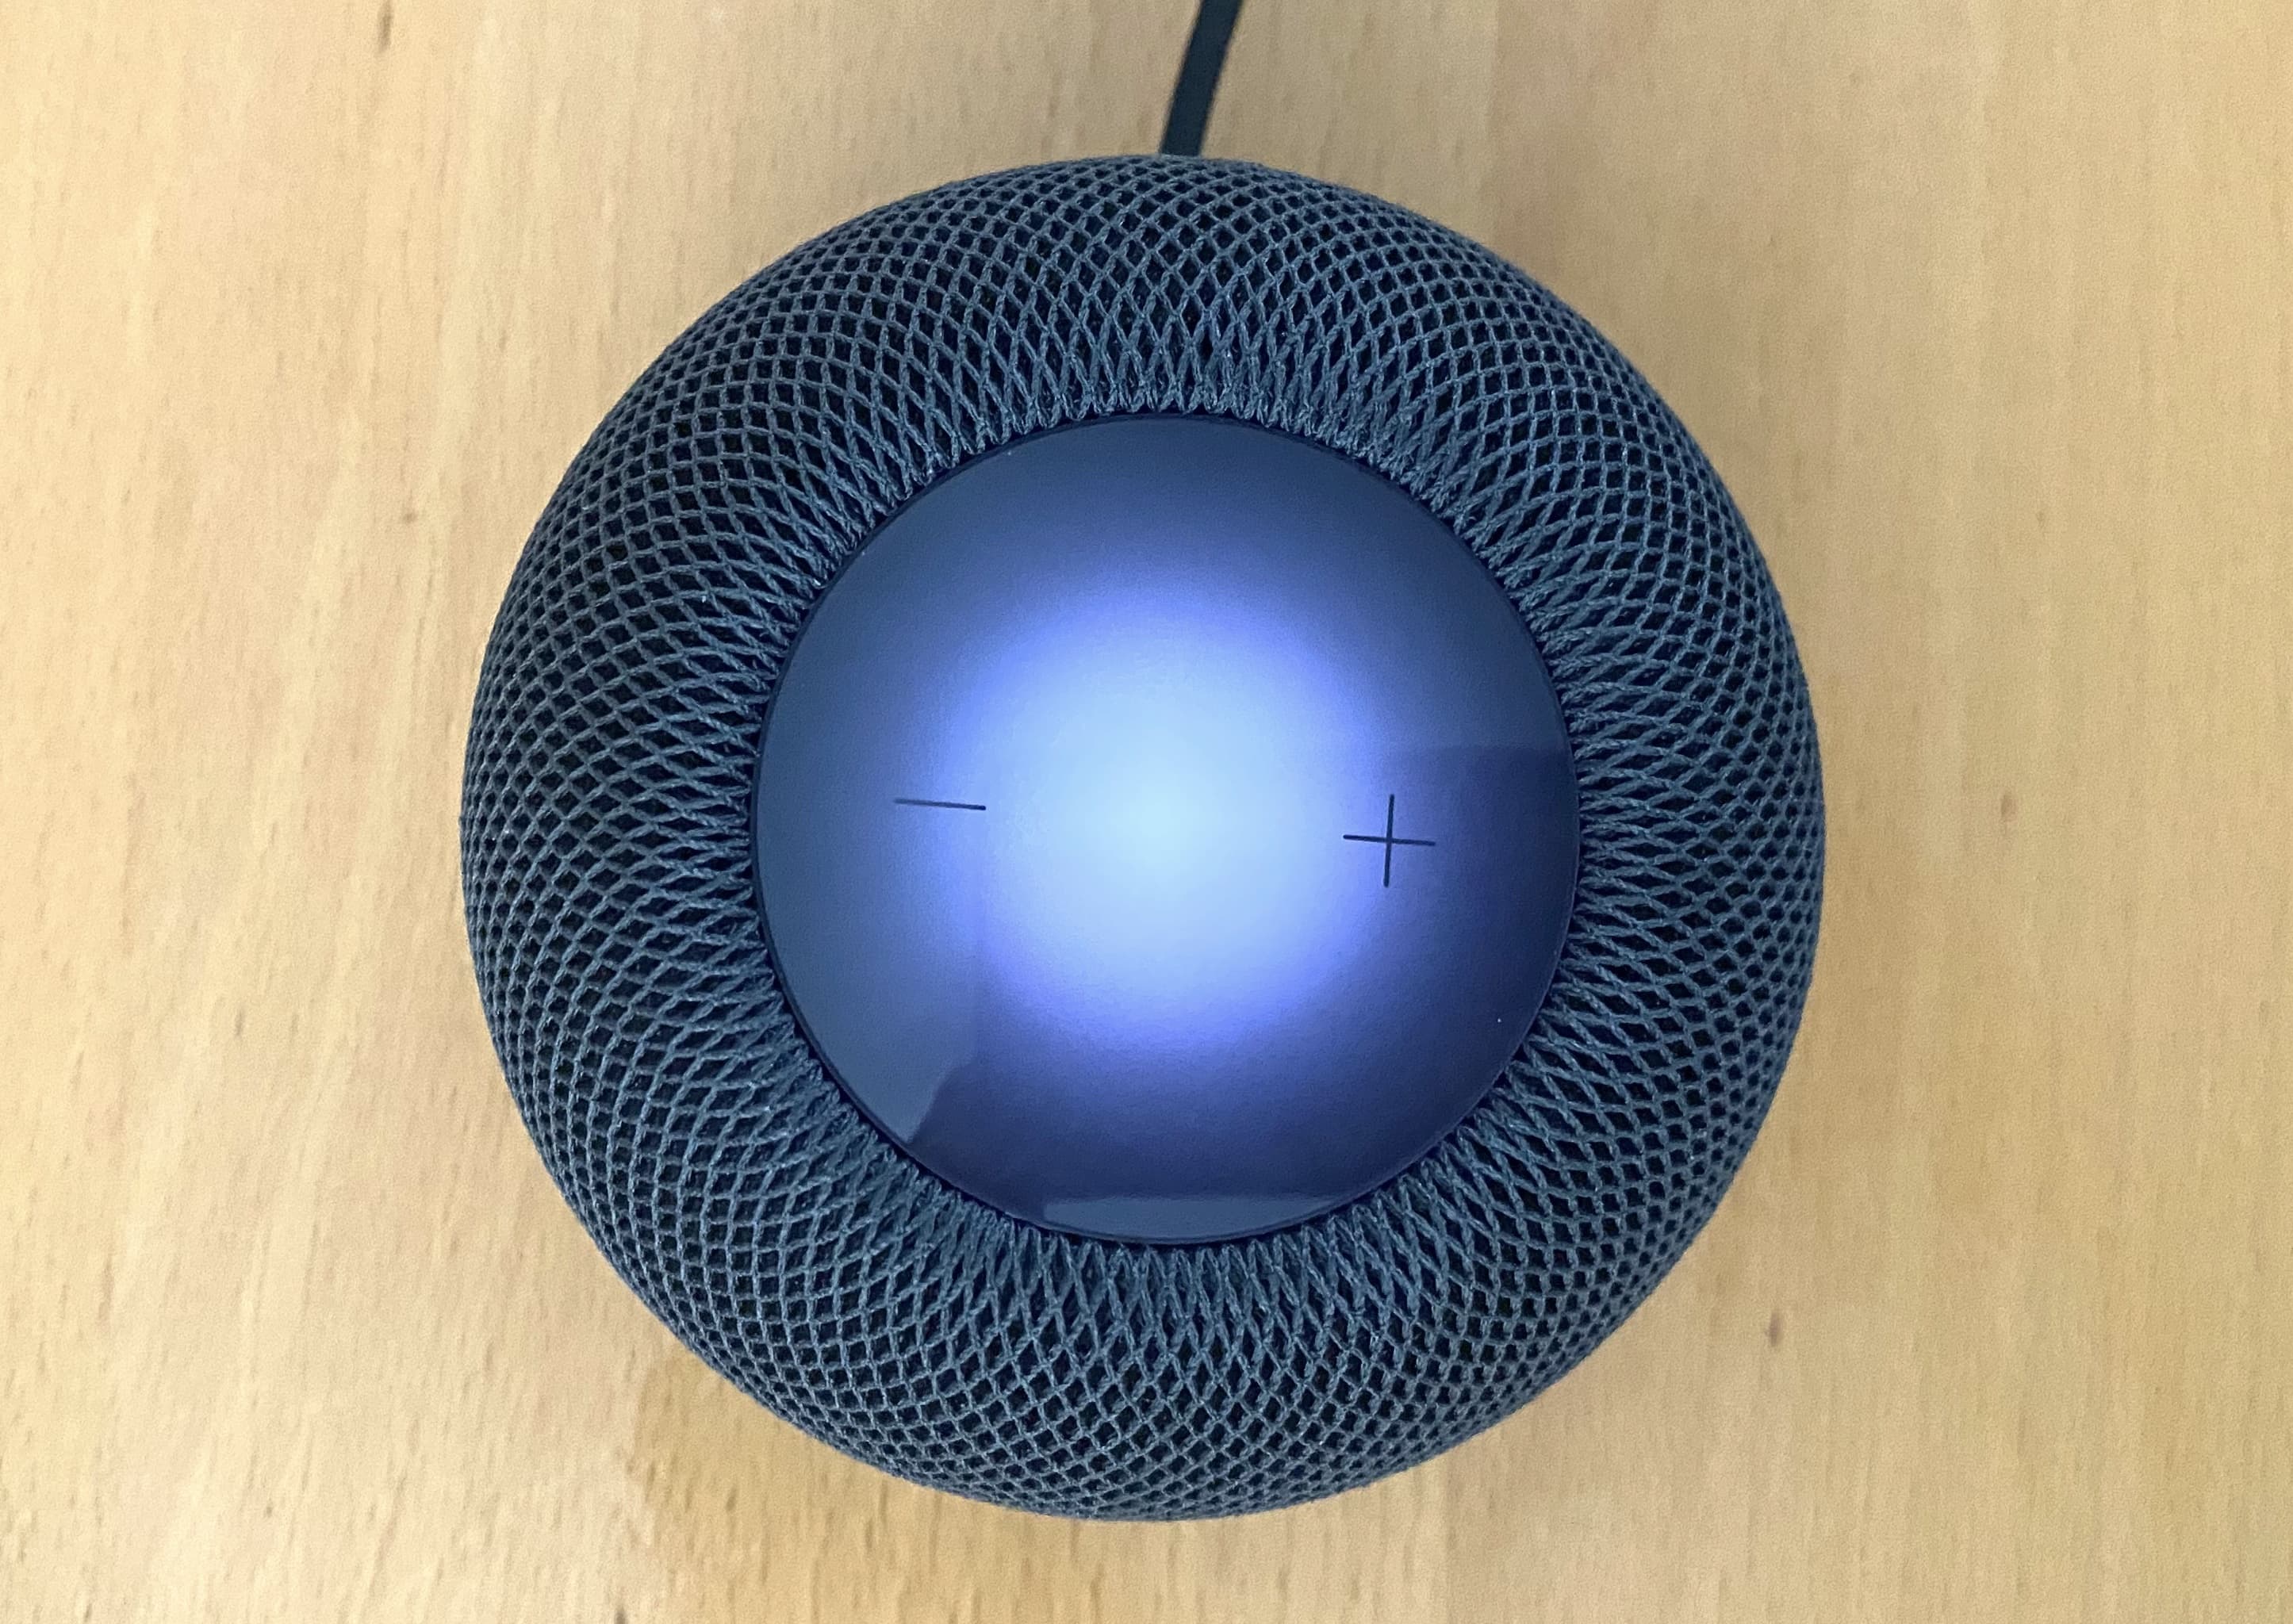 Get a pair. Of HomePods that is.